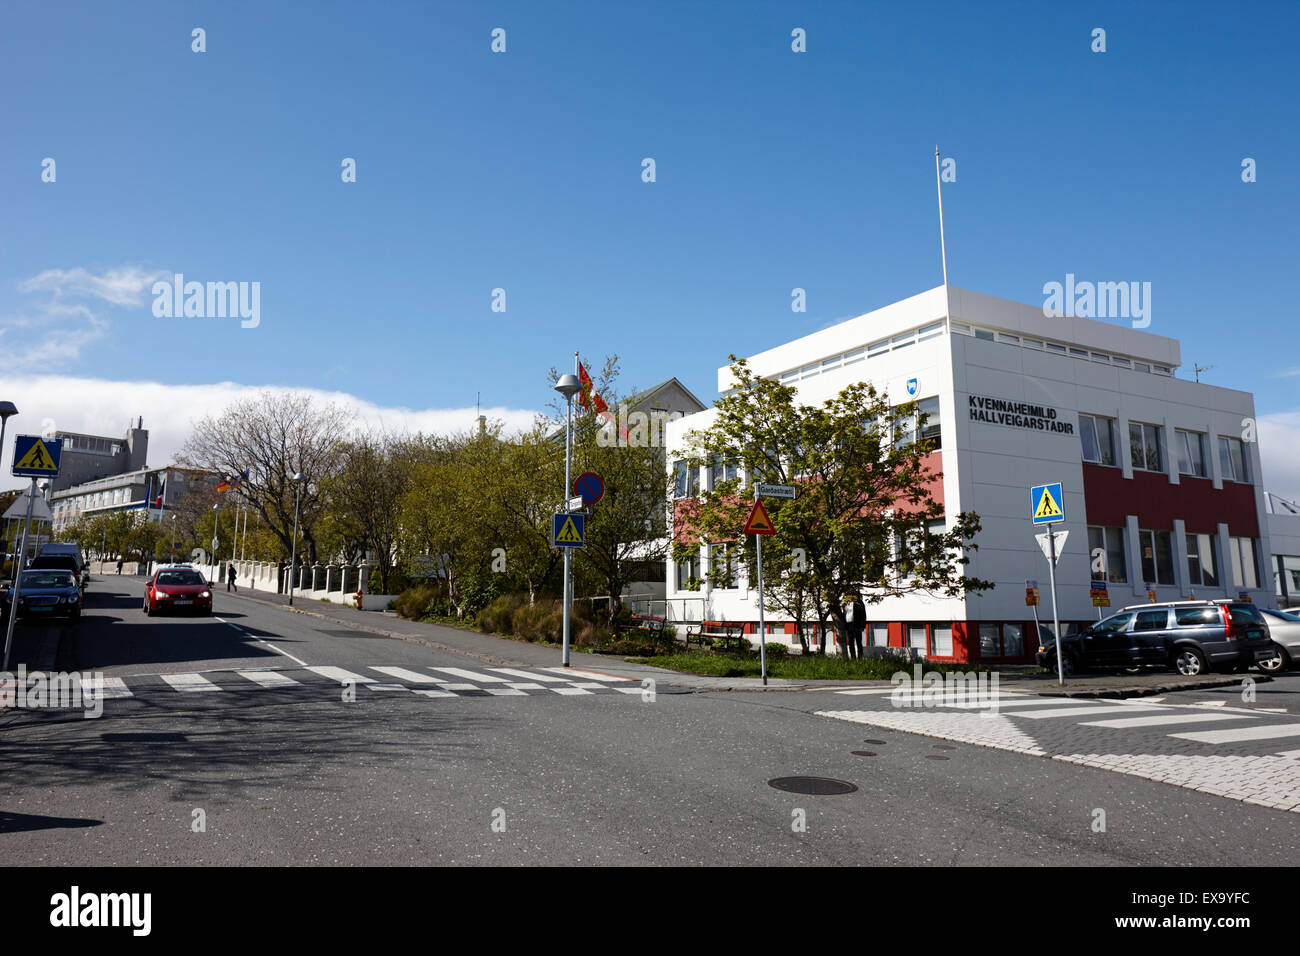 embassy district of tungata with womens rights building on the right in reykjavik iceland Stock Photo